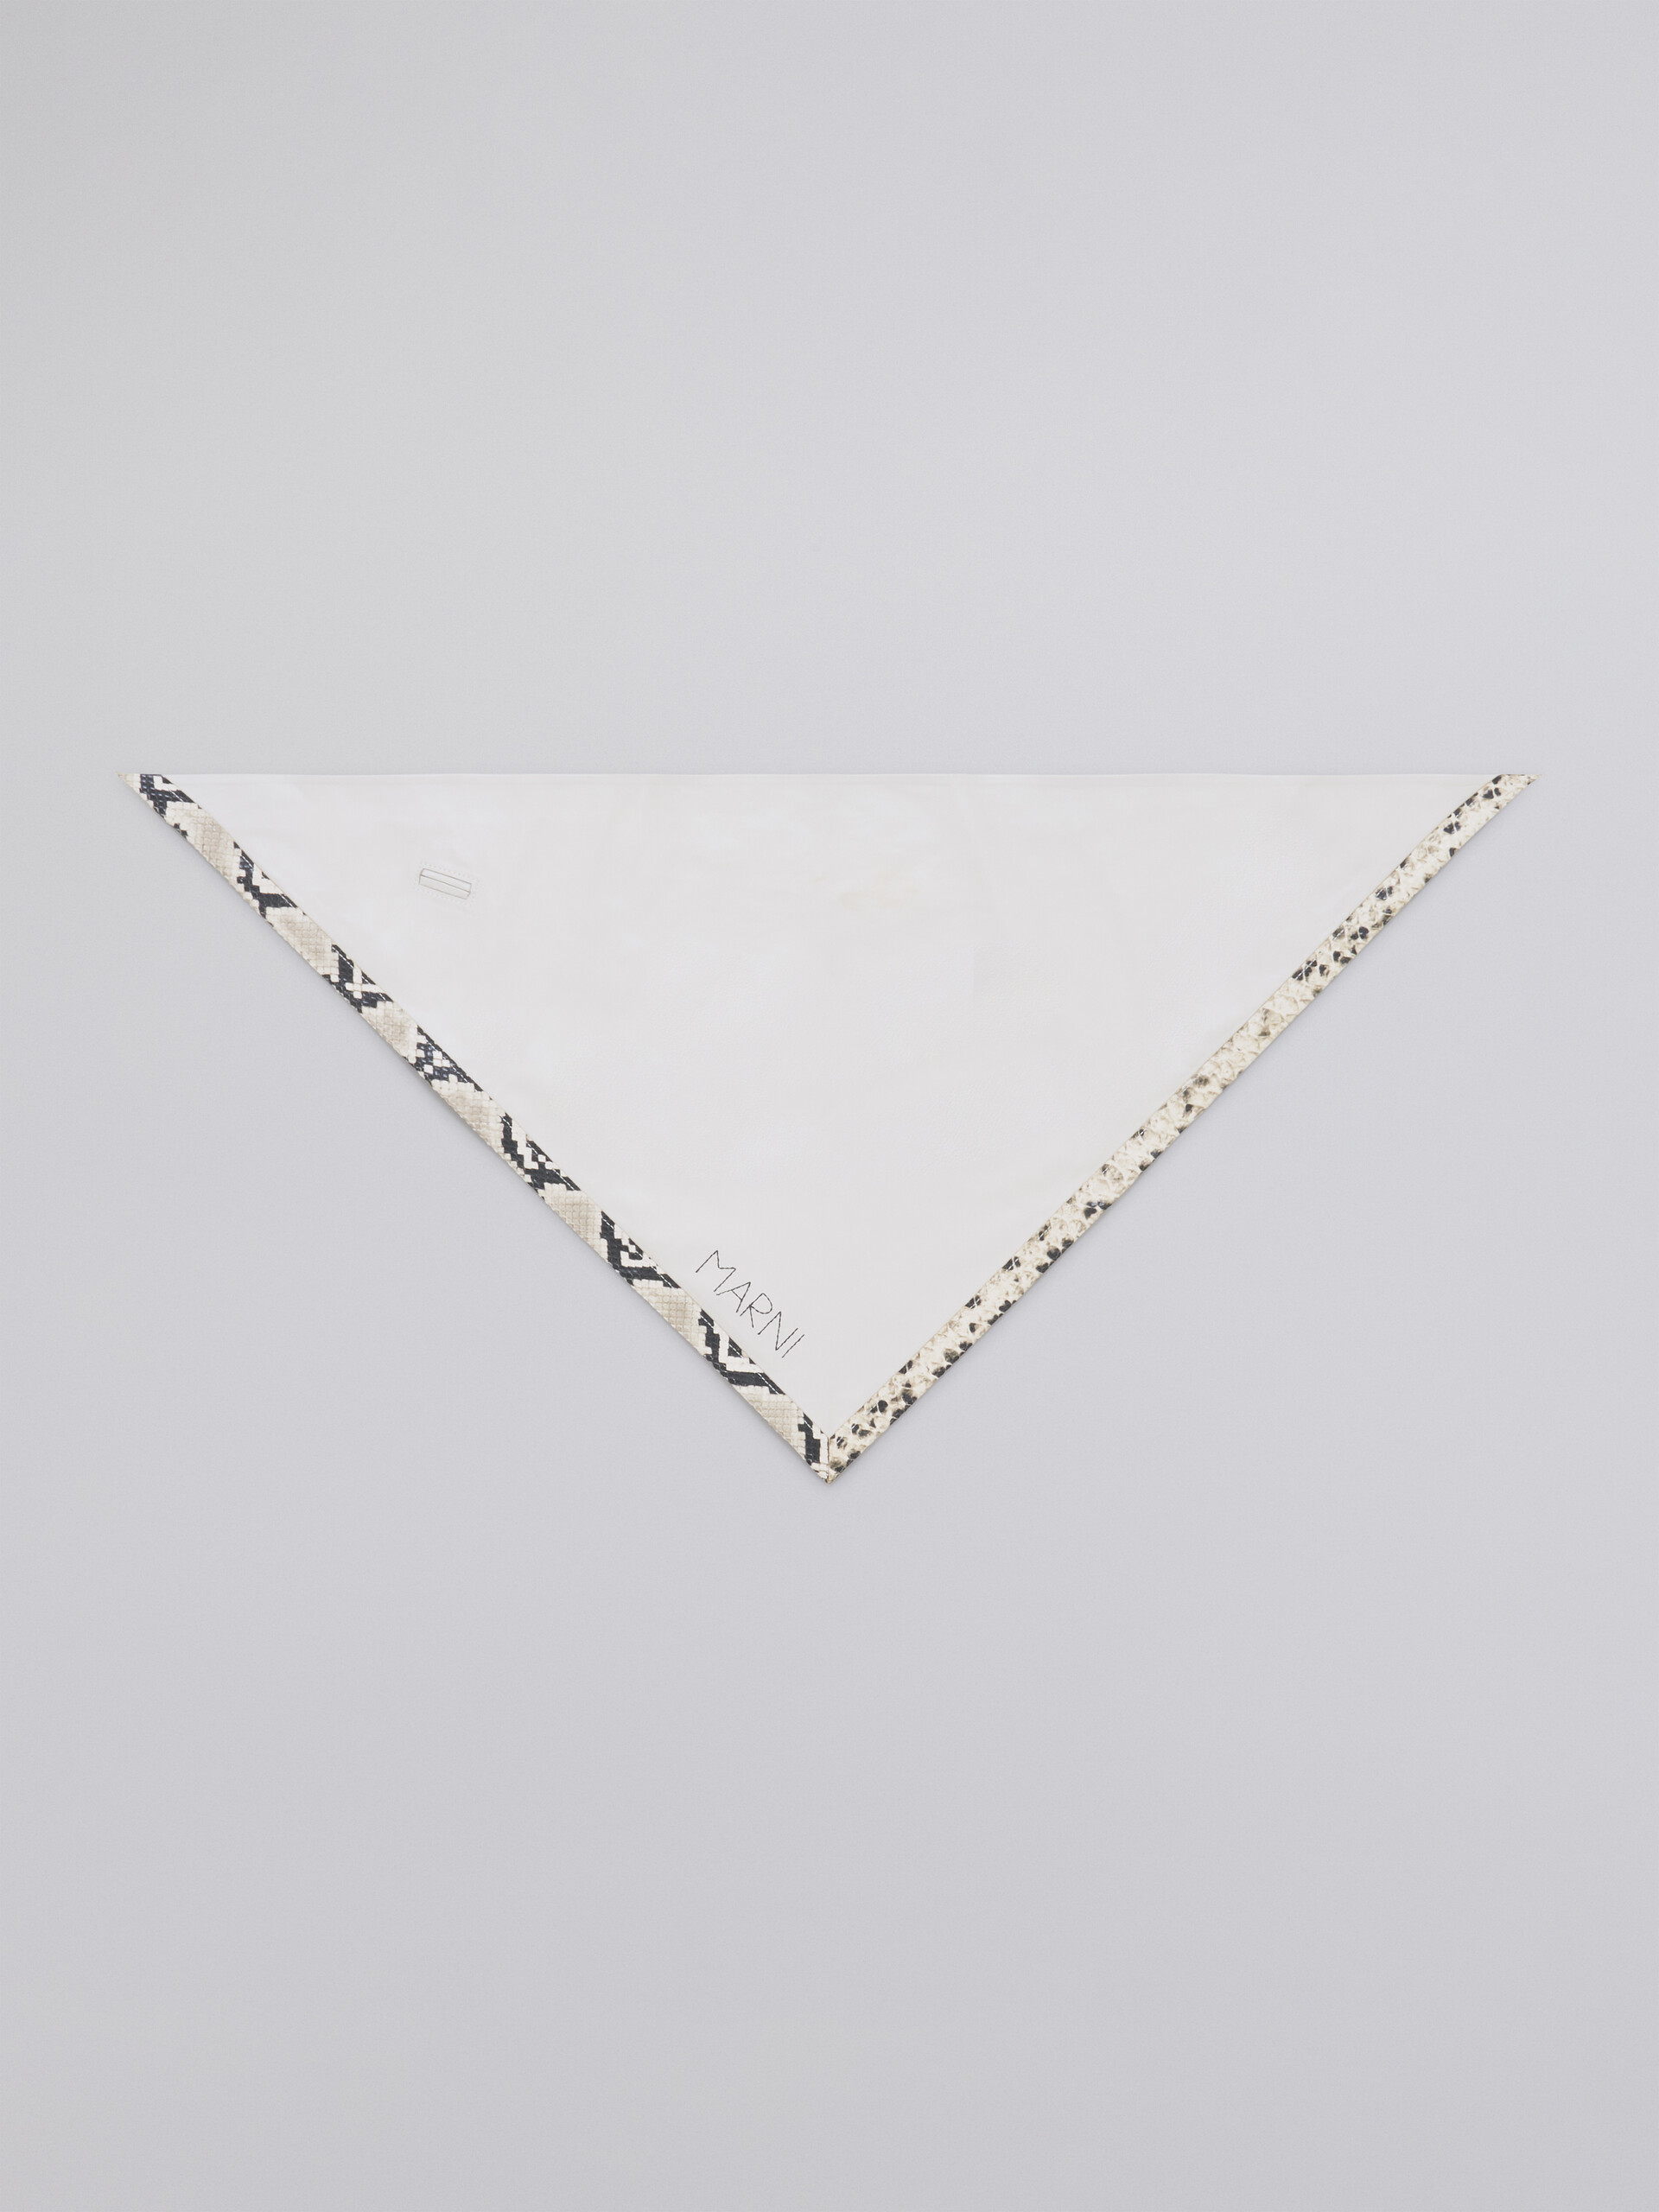 White nappa leather triangular scarf with printed python finish - Other accessories - Image 3